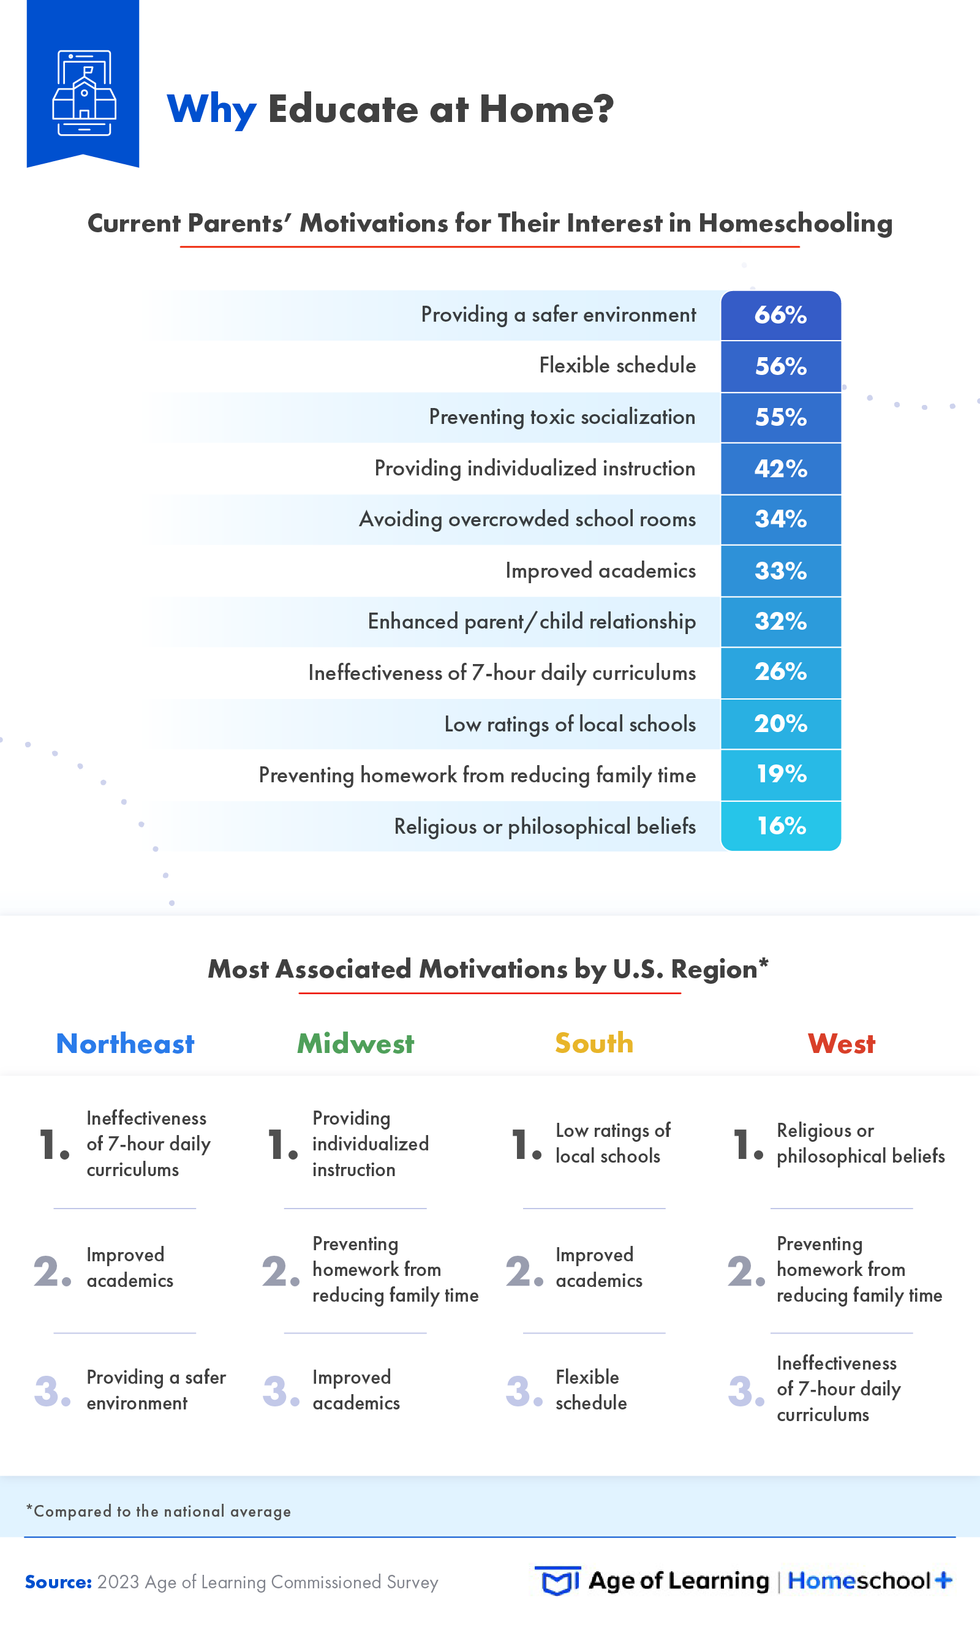 Motivations for homeschooling by region